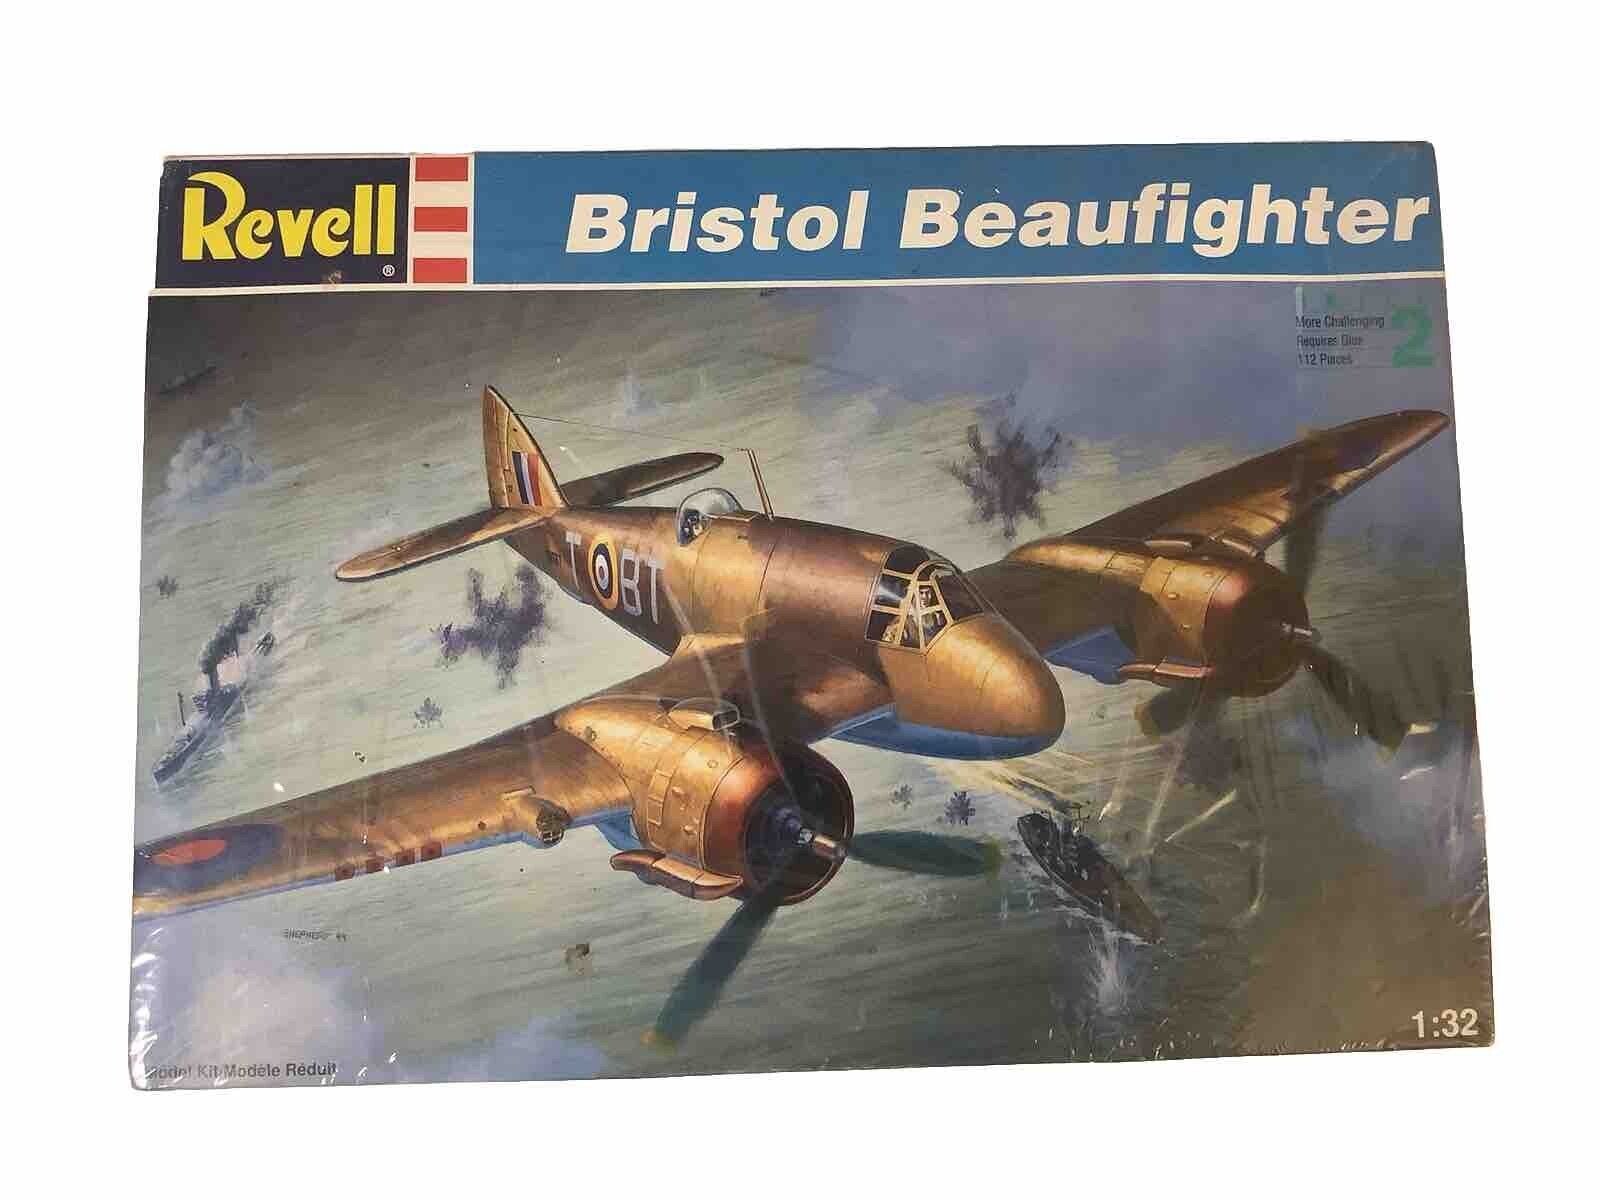 Revell Bristol Beaufighter 1:32 Scale Model #4660 Partially Assembled Complete